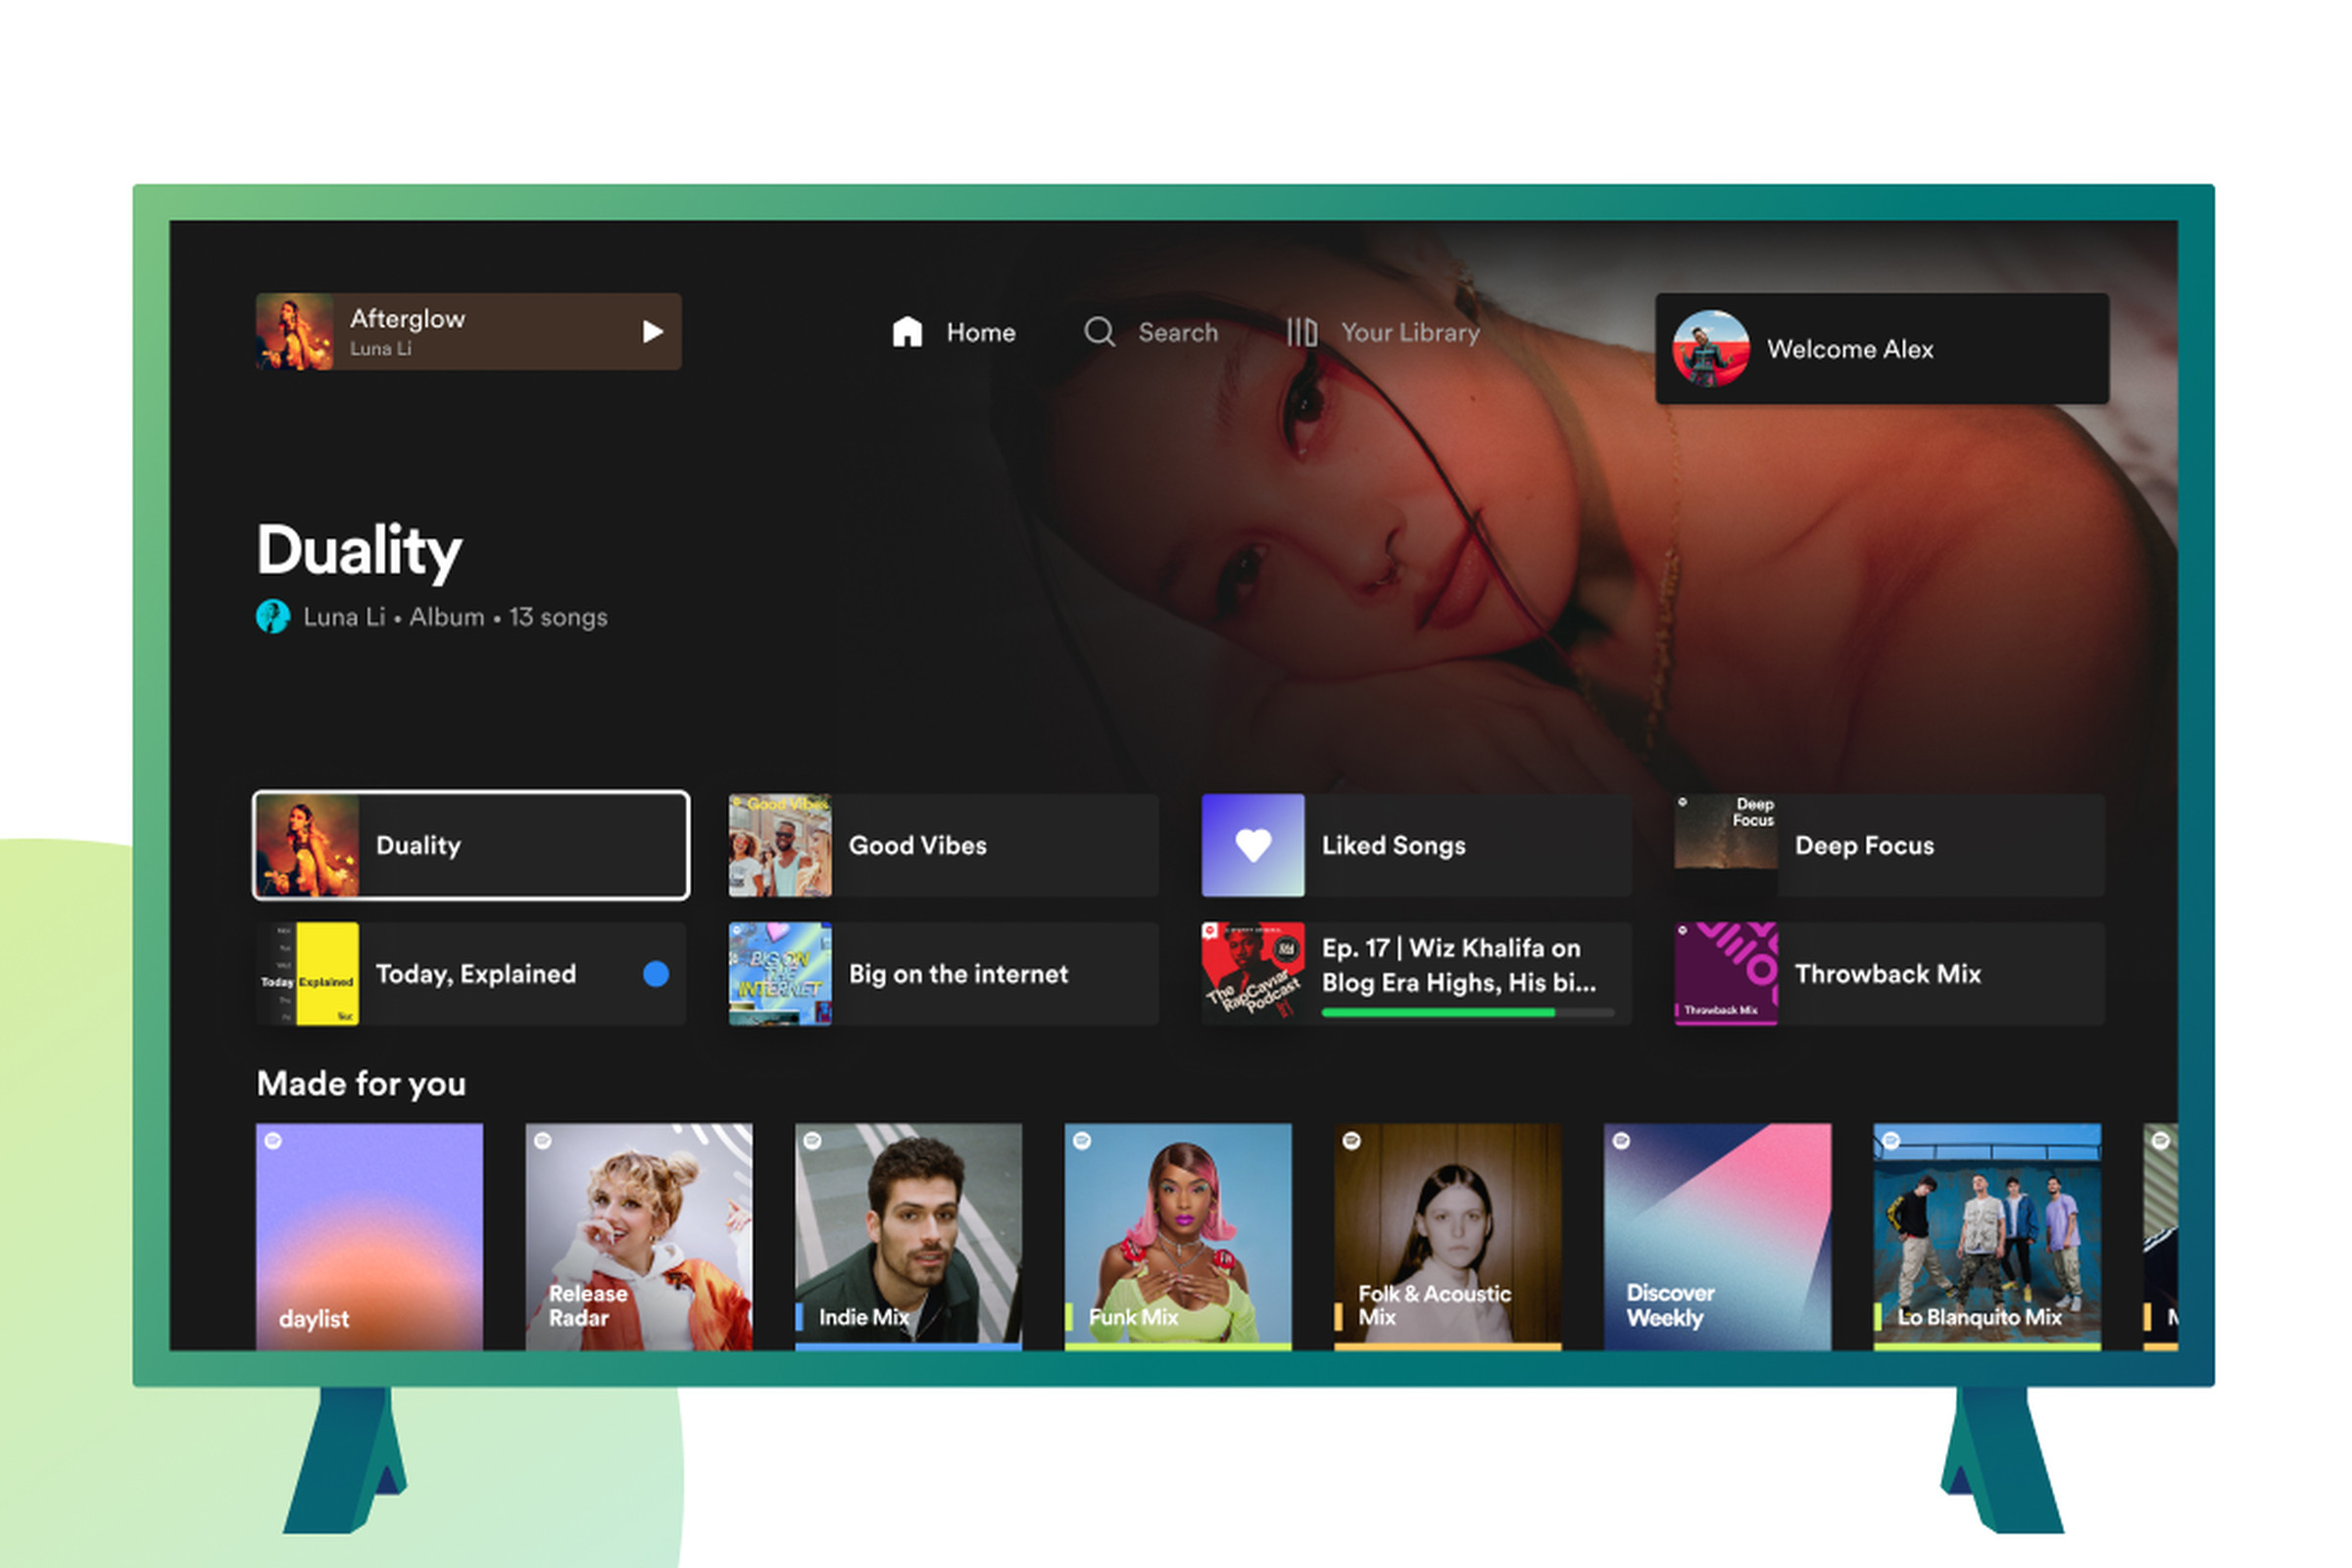 An image showing the Spotify app on TV